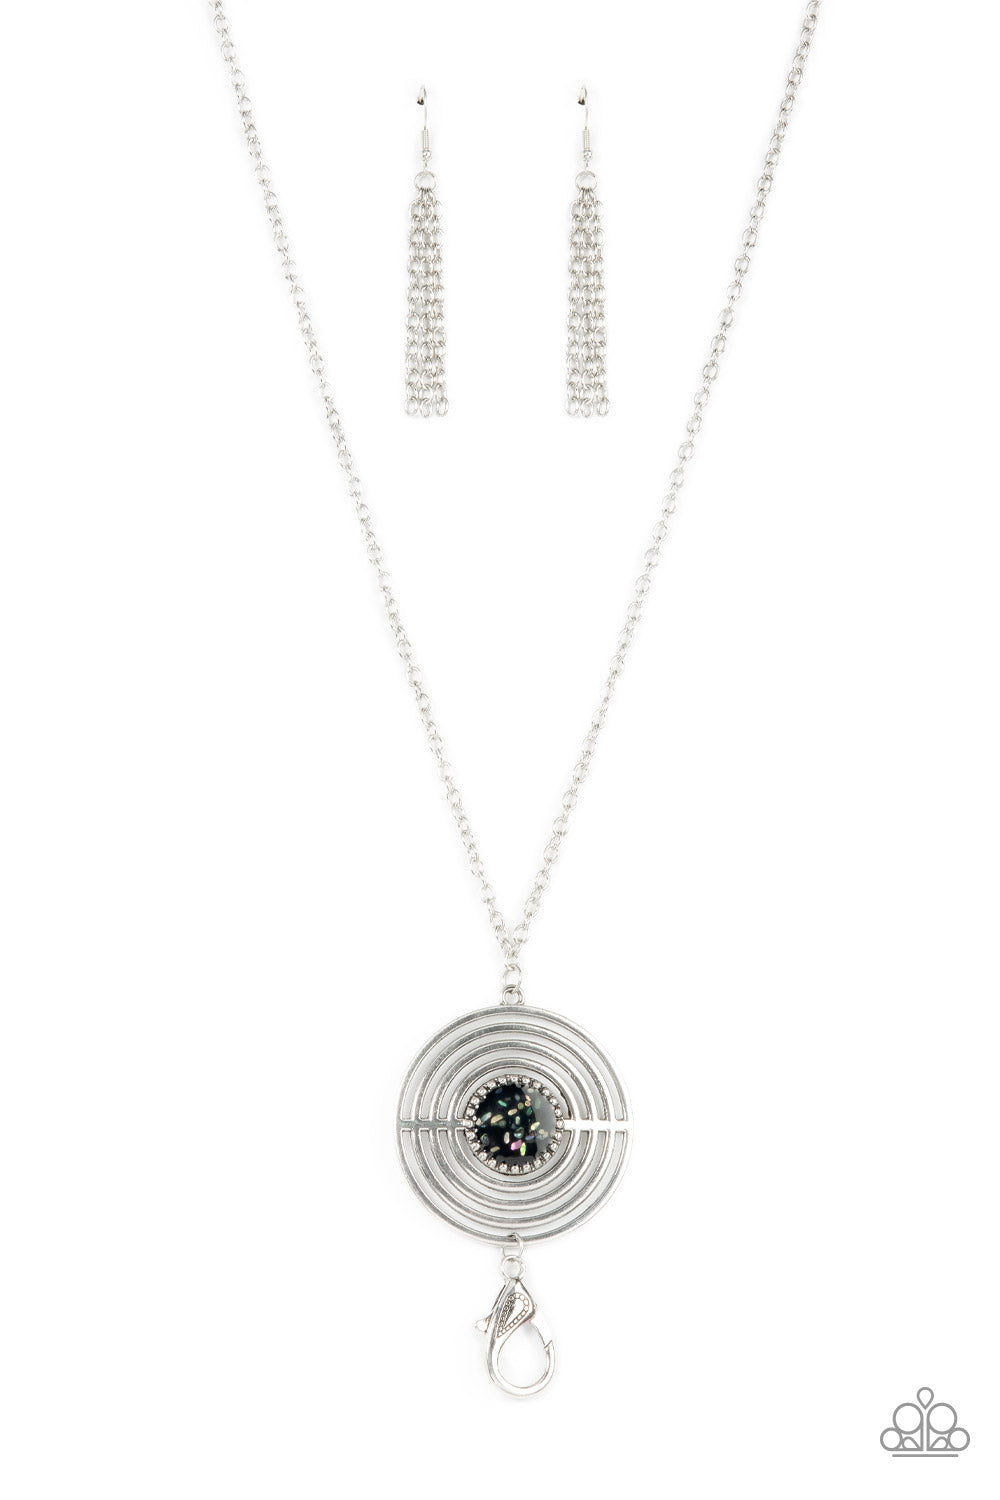 Targeted Tranquility - Black Lanyard Necklace